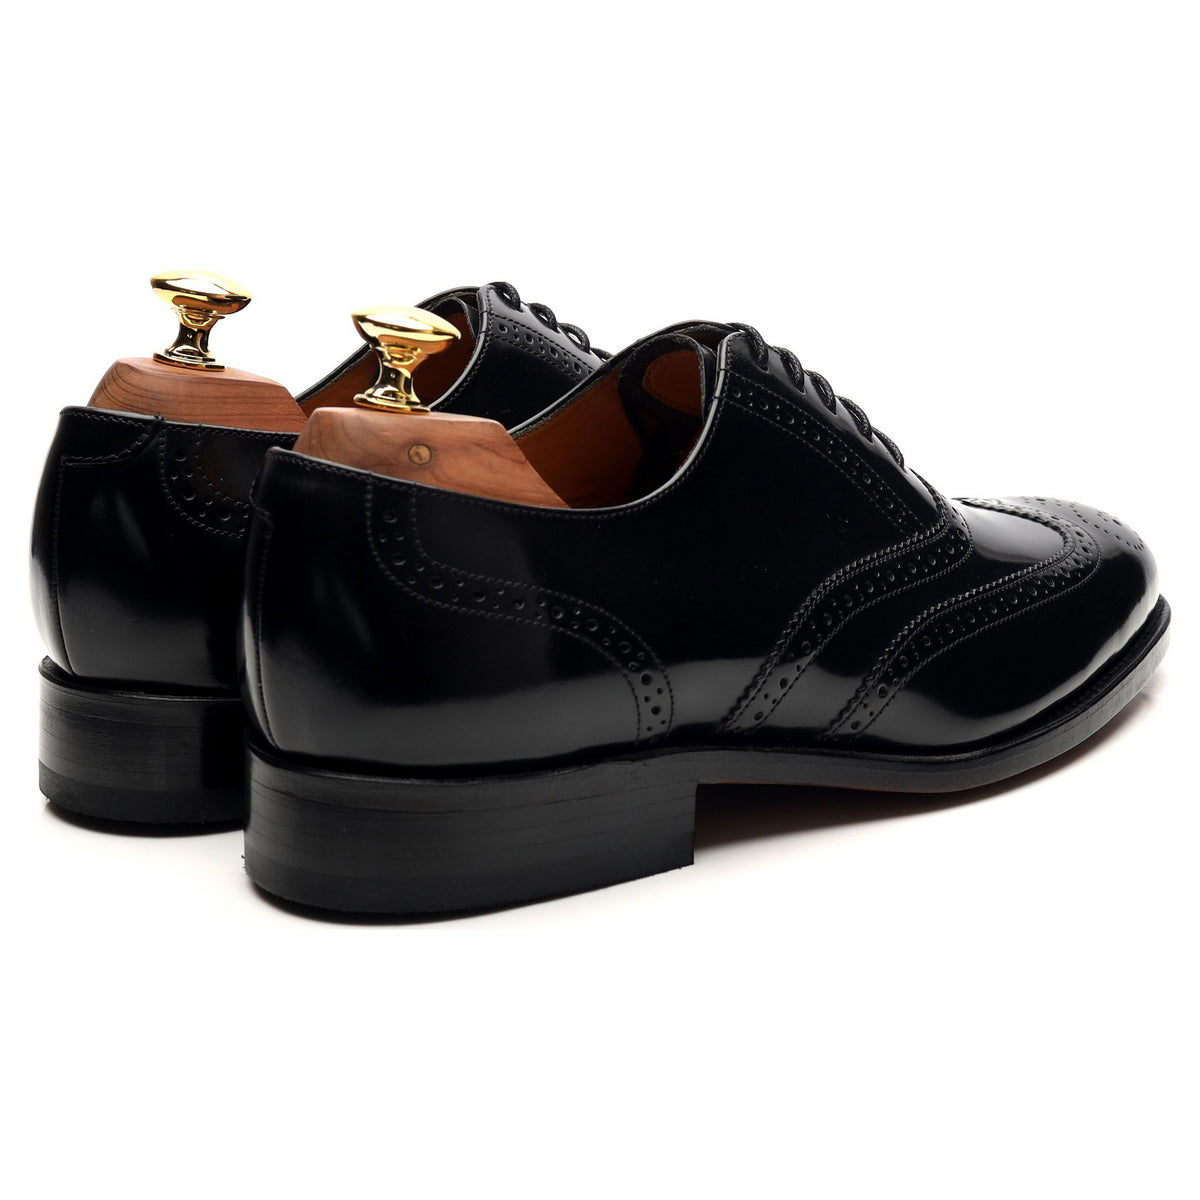 Black Leather Oxford Brogues UK 6.5 G